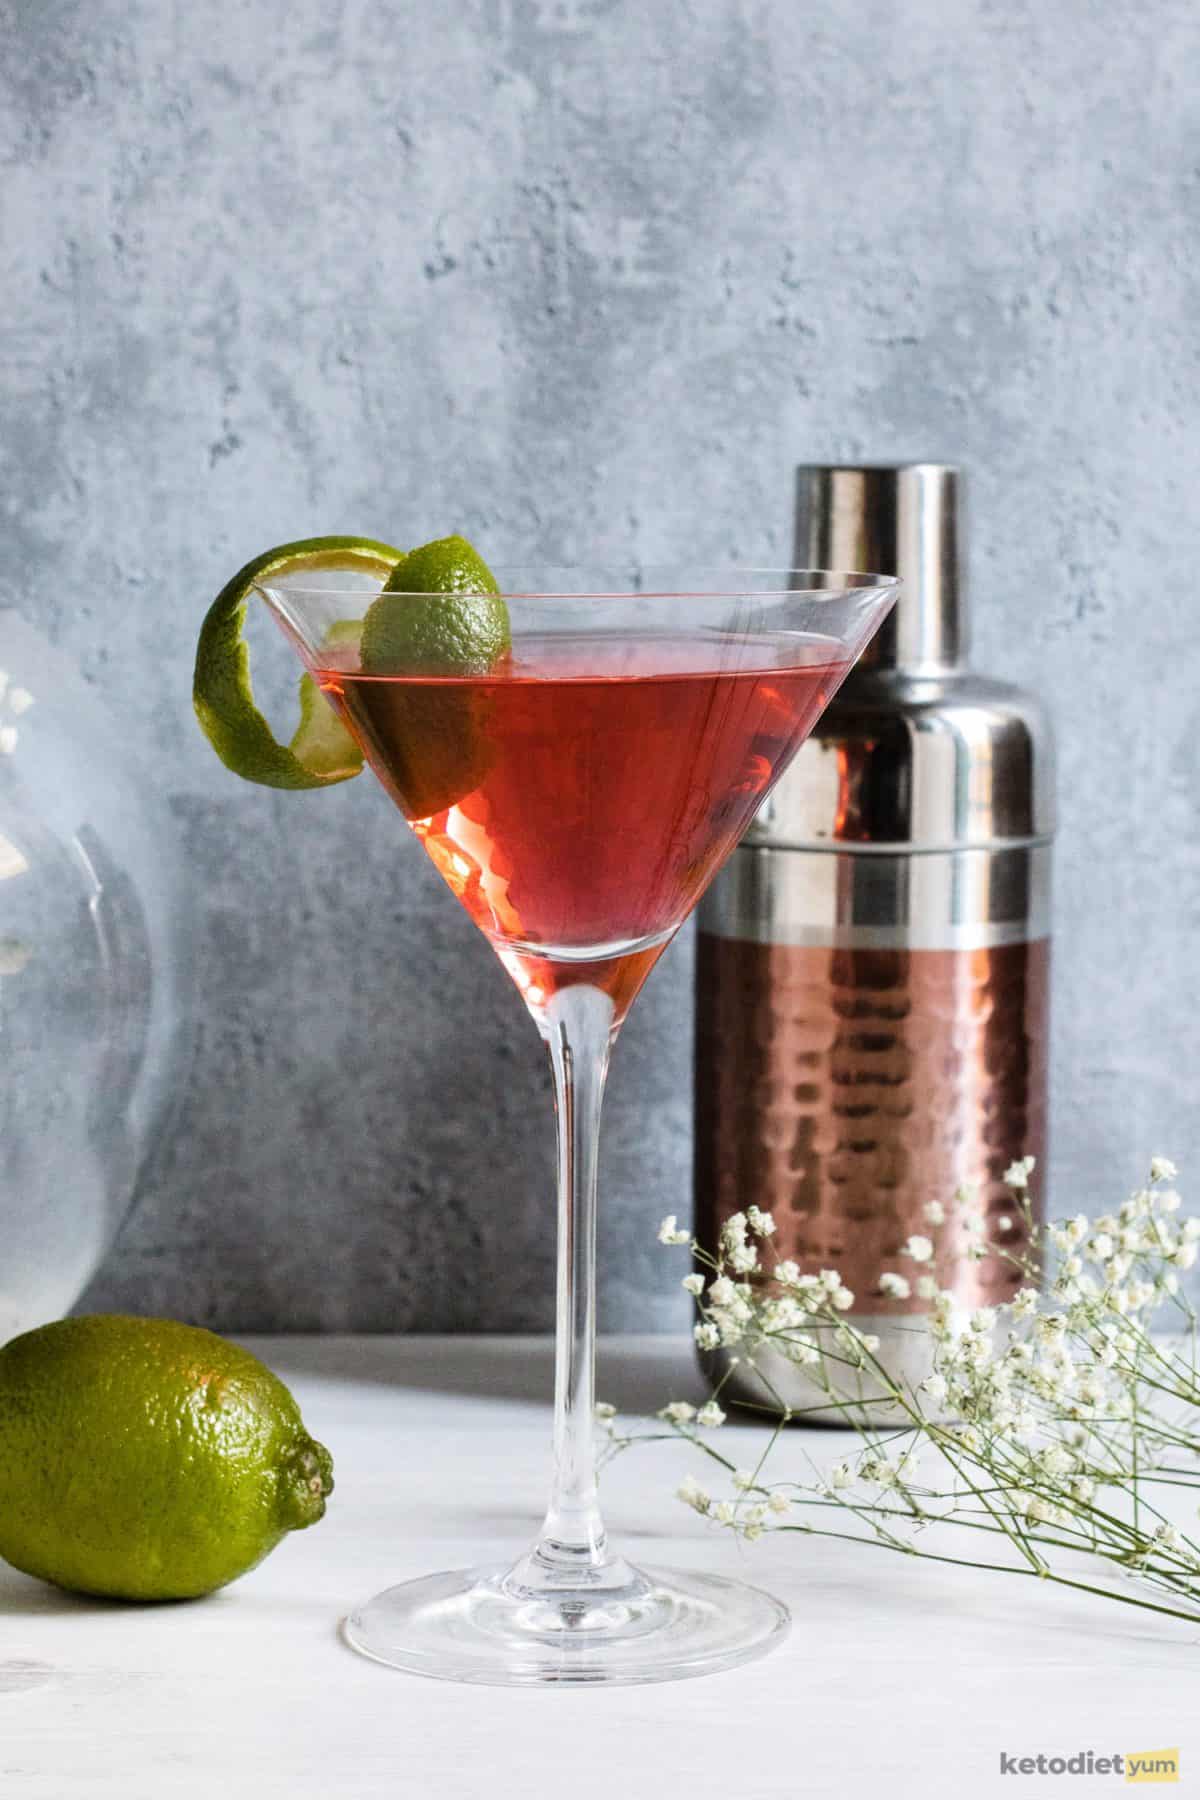 A delicious keto cocktail or low carb cosmopolitan in a martini glass on a table